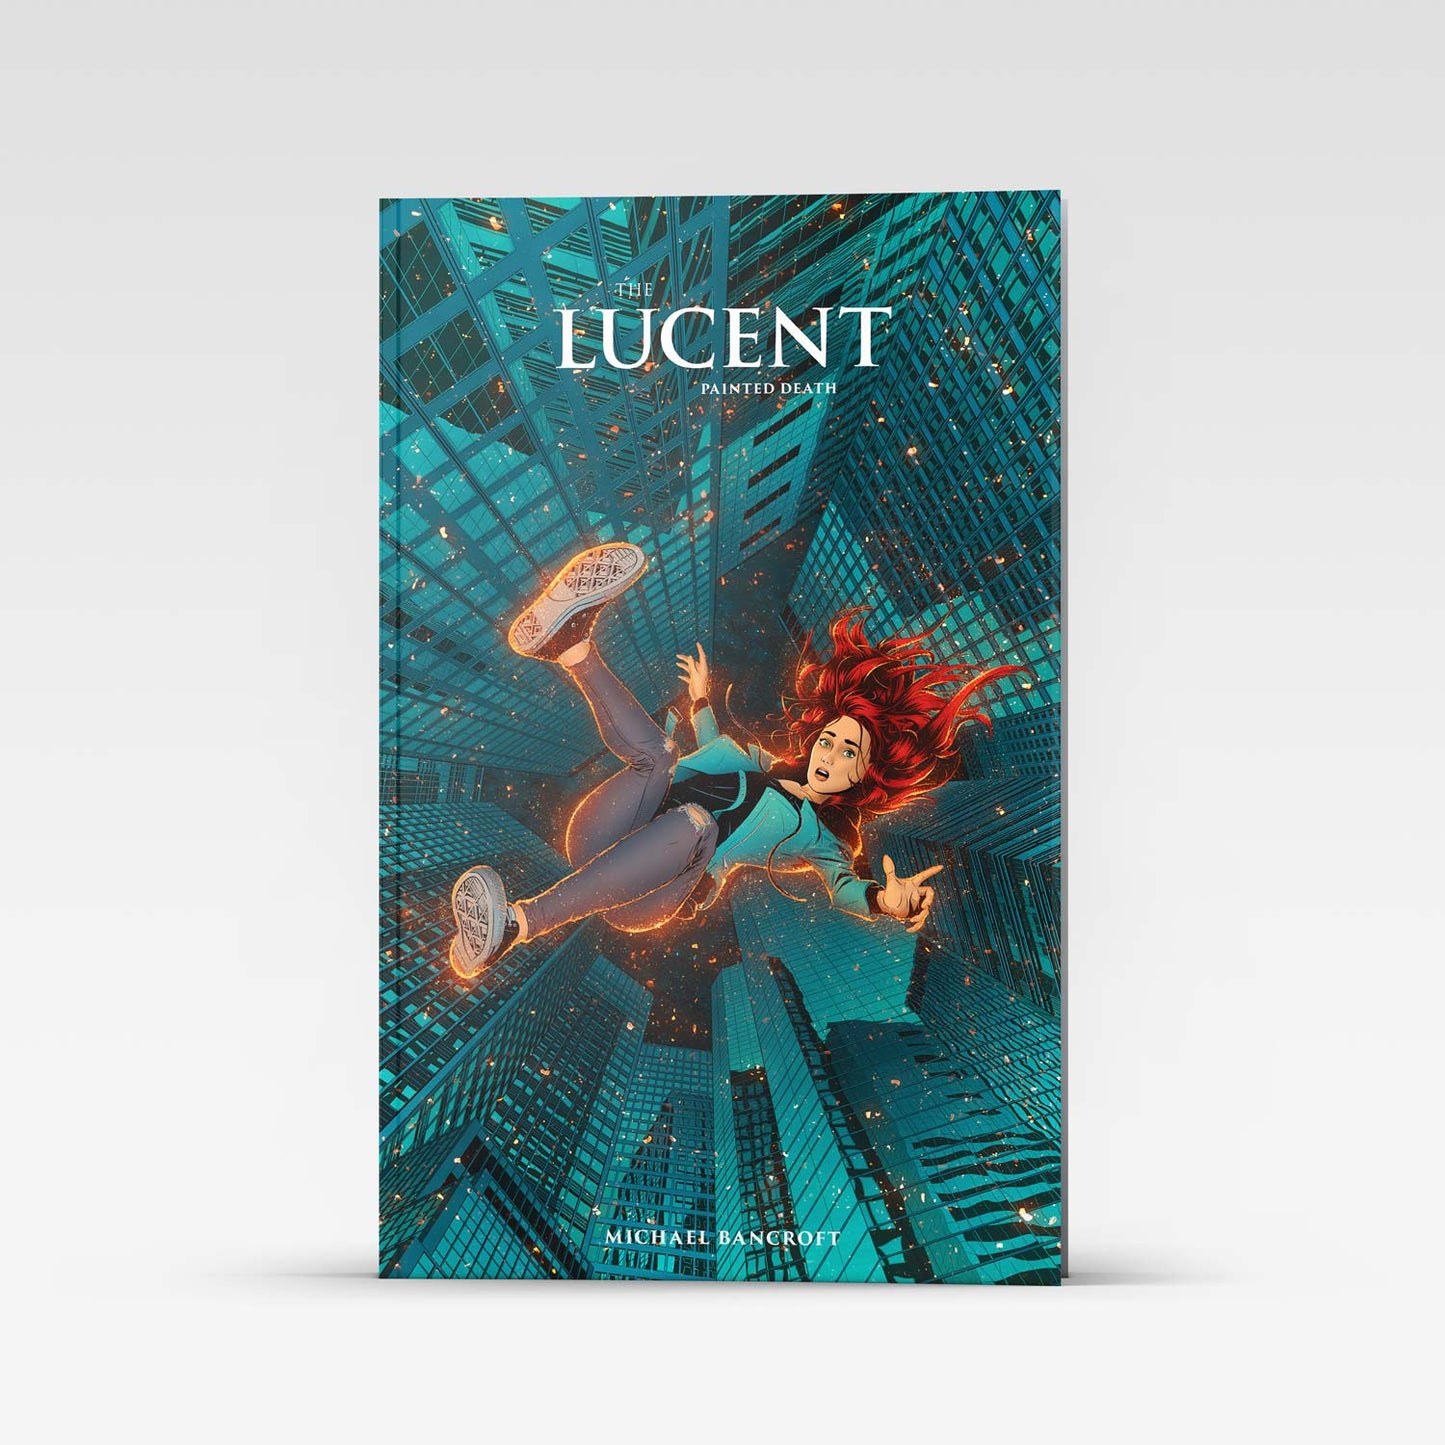 The Lucent: Painted Death Cover Art 11.75" x 16.5" (A3)